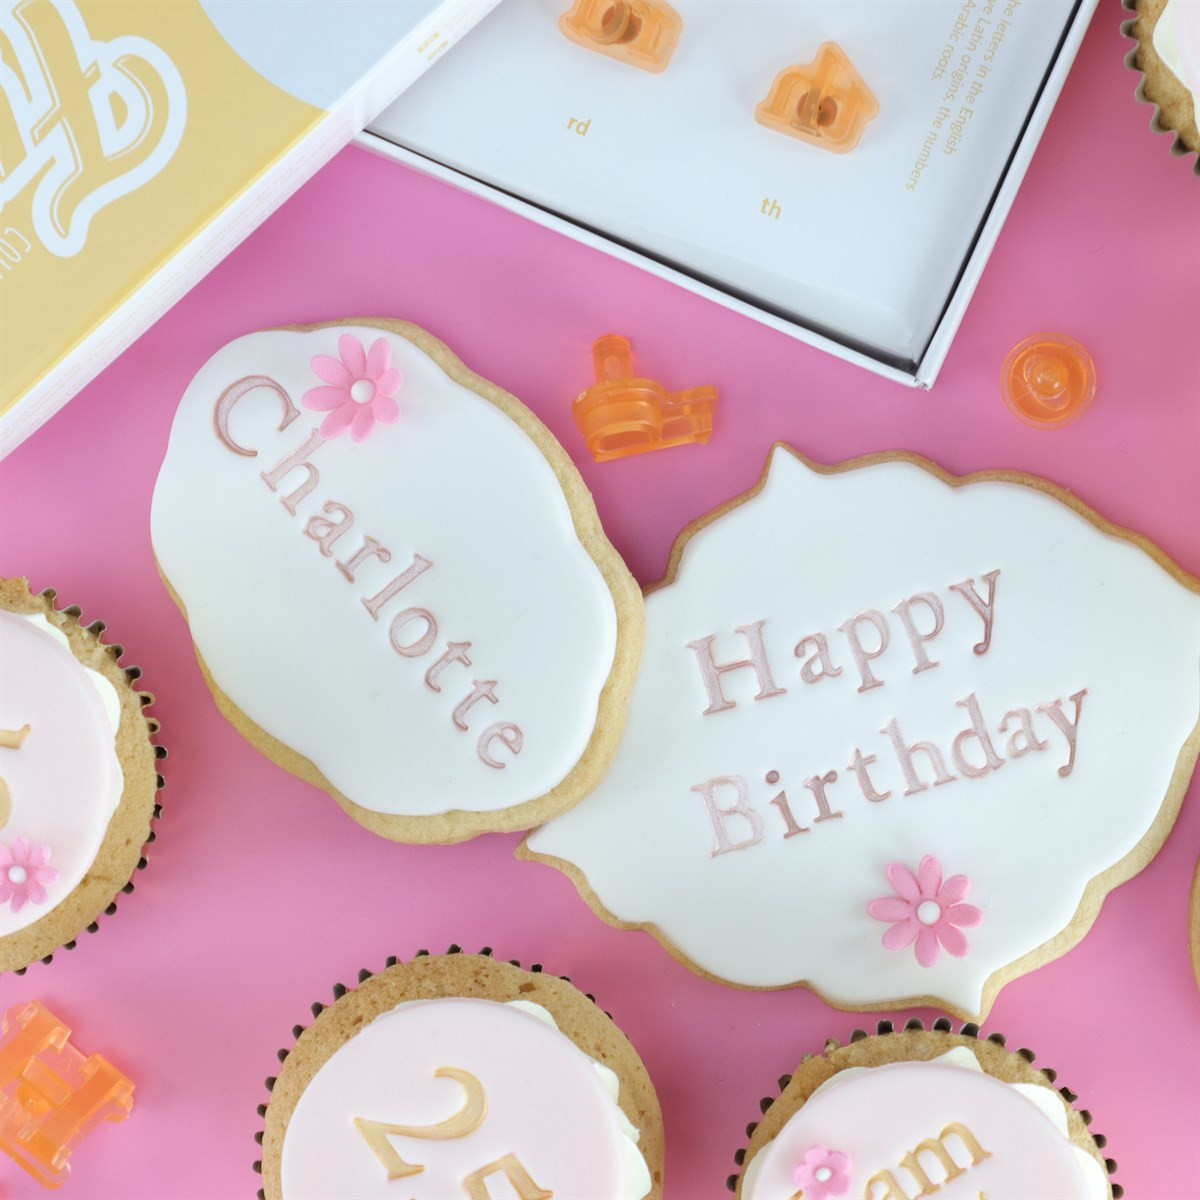 PME Text Stamp Set Cupcake/Cookie Fun Fonts - Collection 2